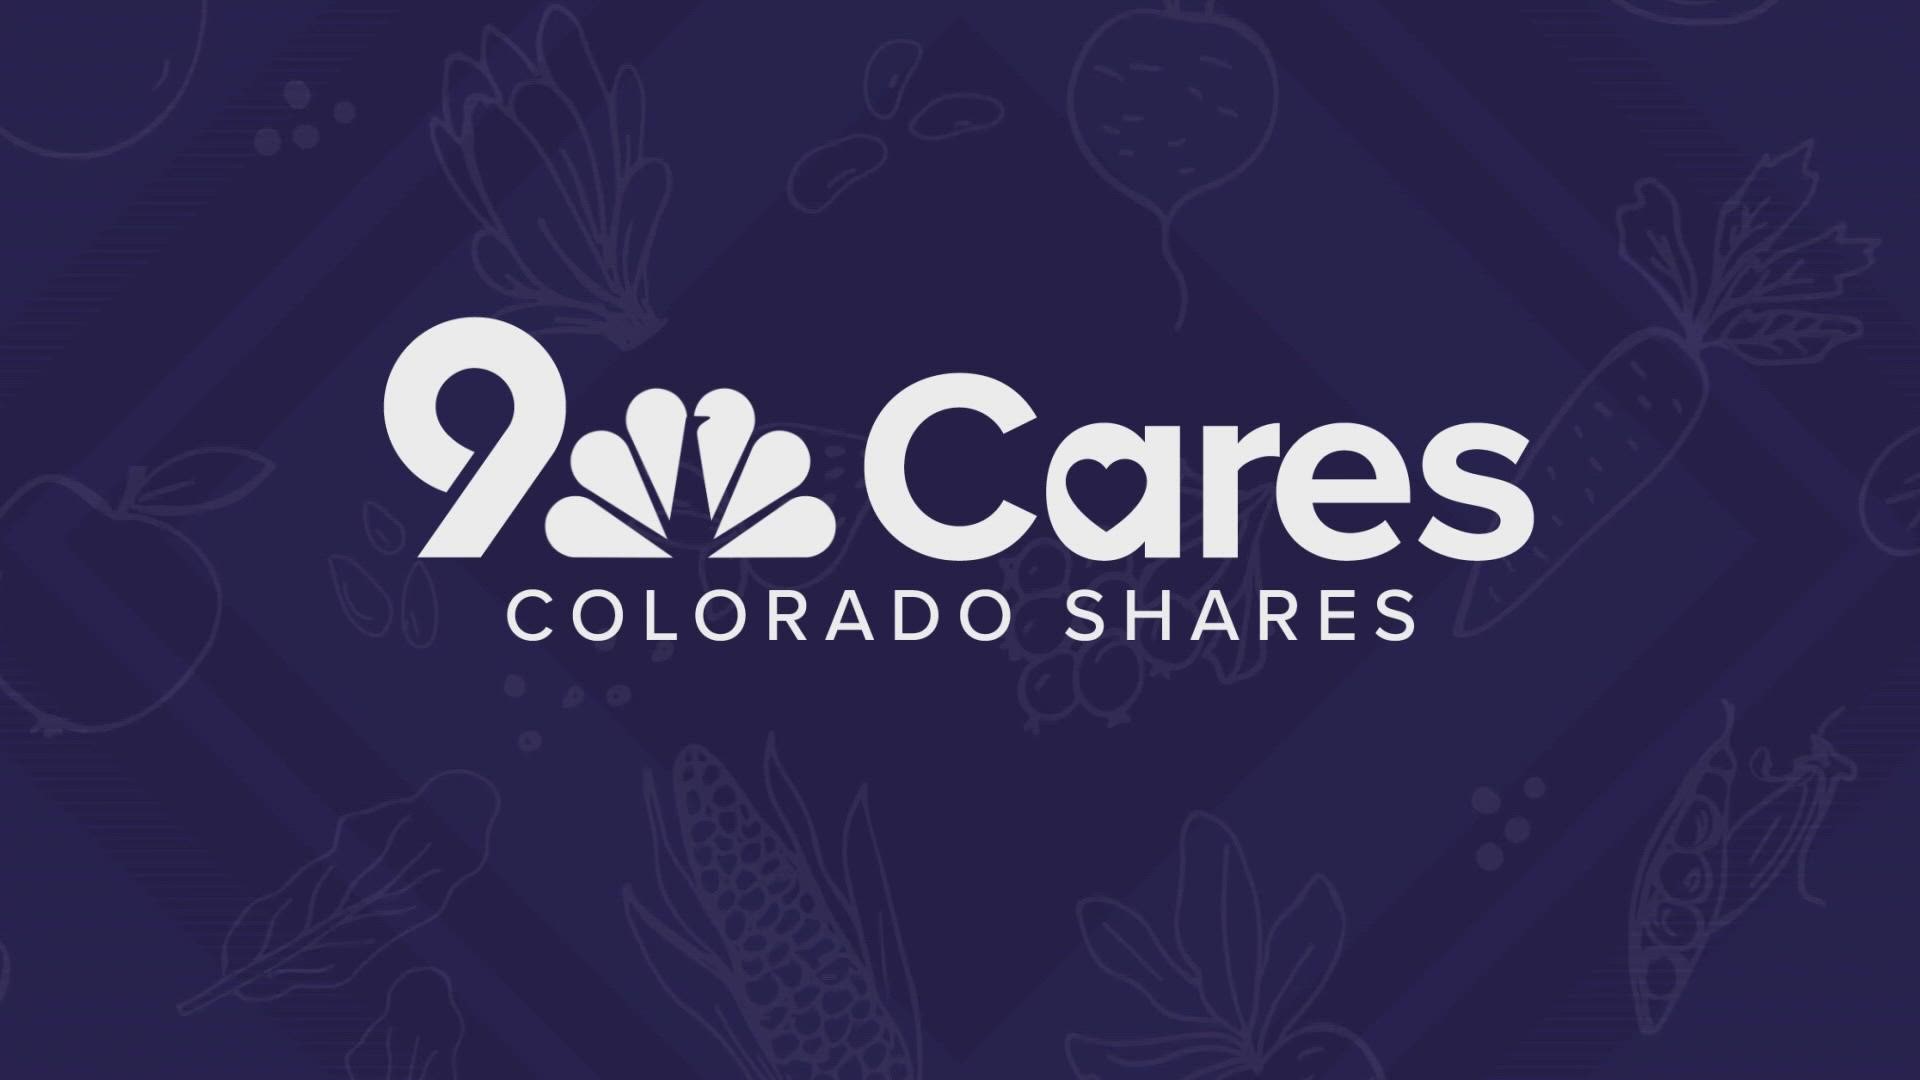 Help us fill the food banks and pantries in our community with a donation to the 9Cares Colorado Shares holiday drive.